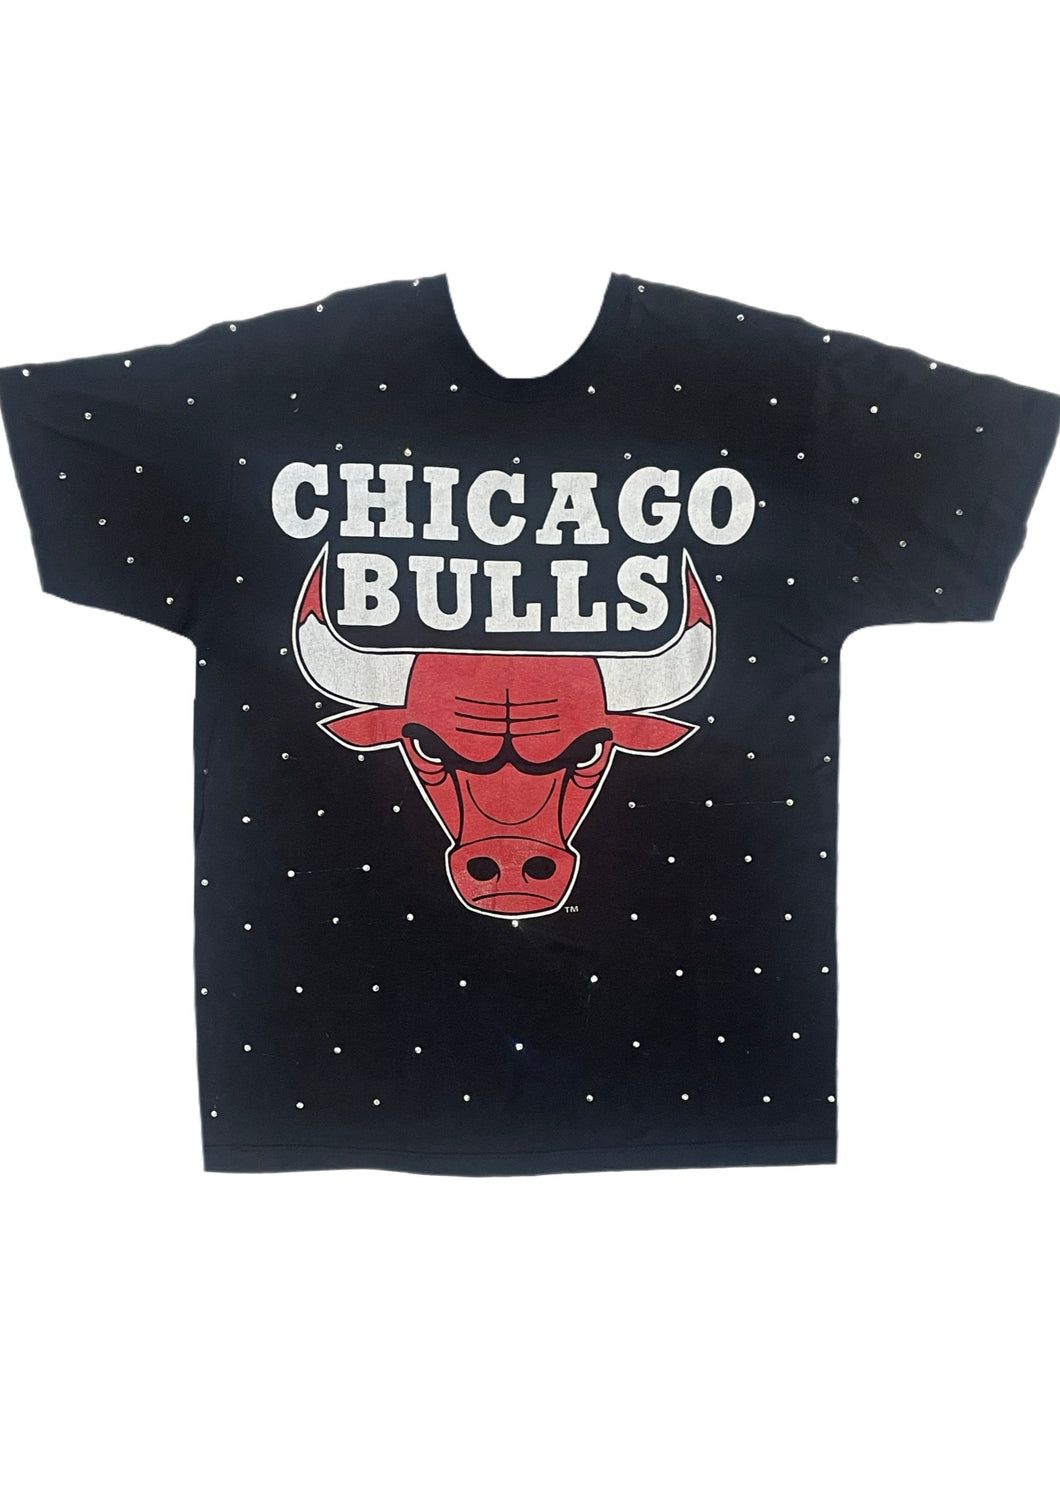 Chicago Bulls, NBA One of a KIND Vintage Tee with Overall Crystal Design